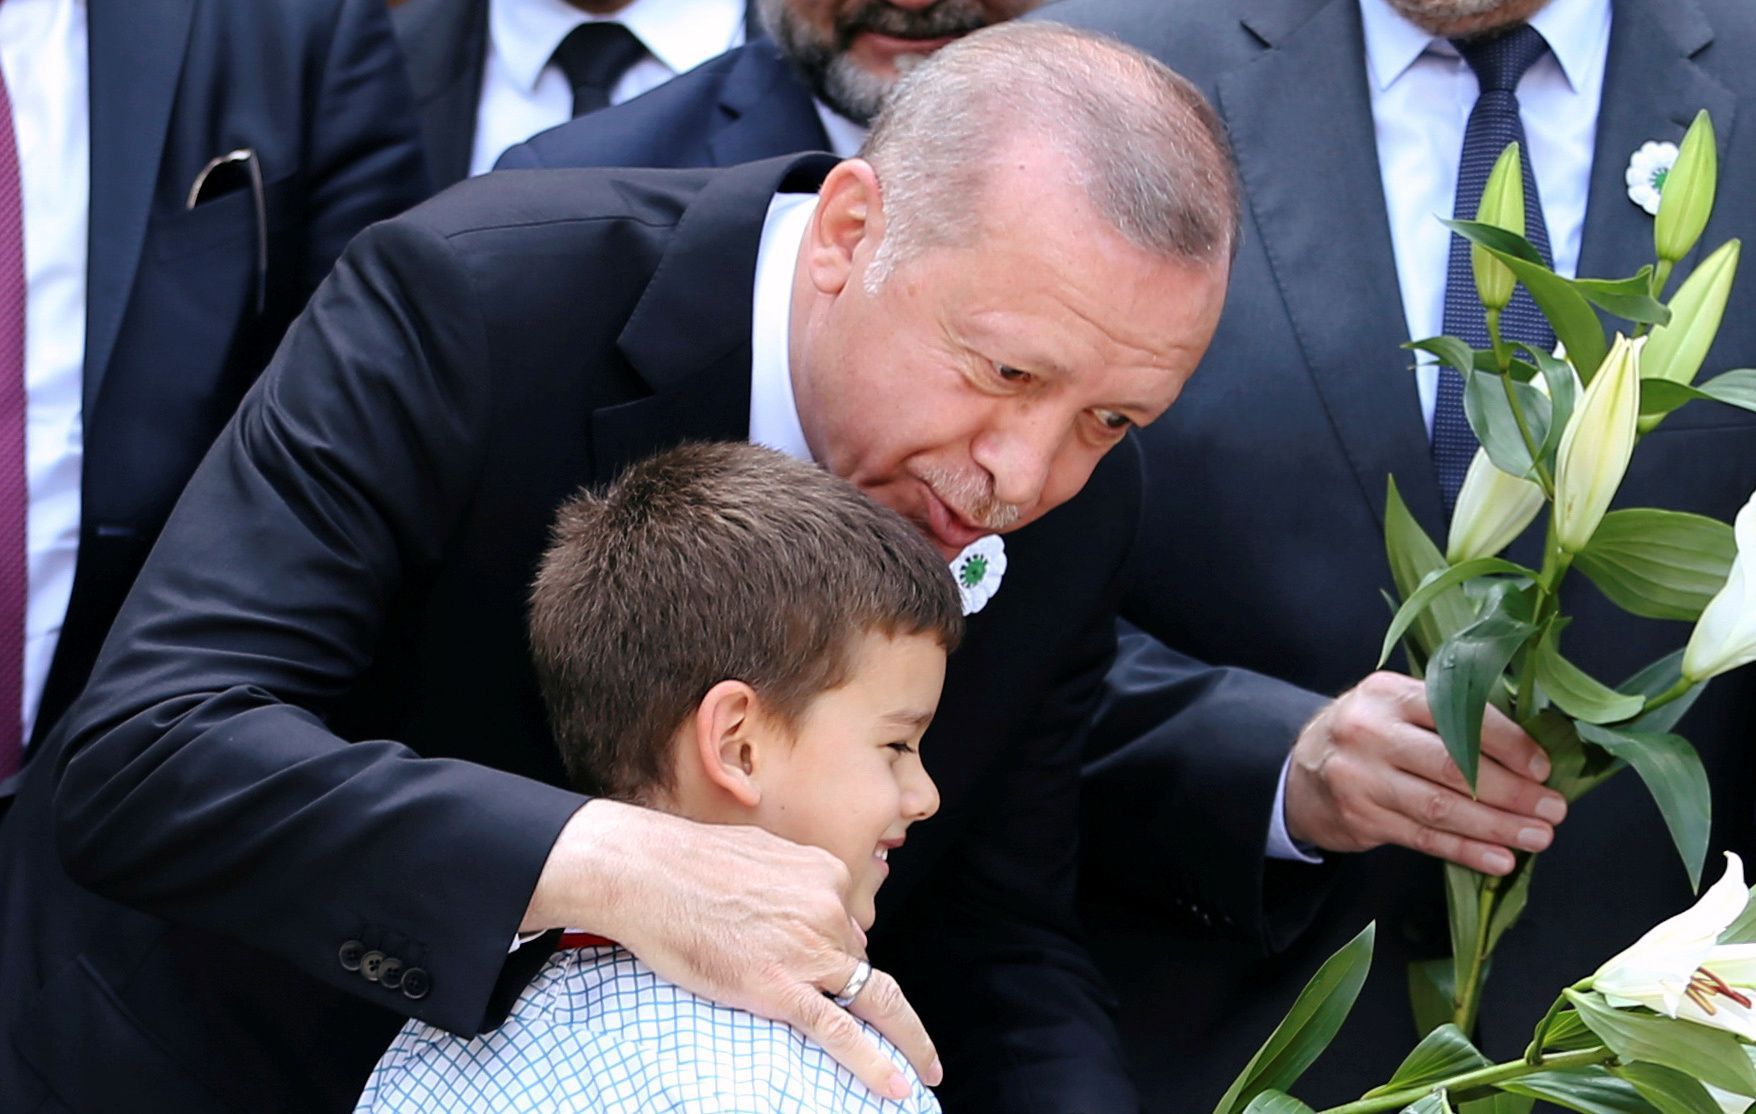 Turkey's President Erdogan pays his respects to the Srebrenica genocide victims